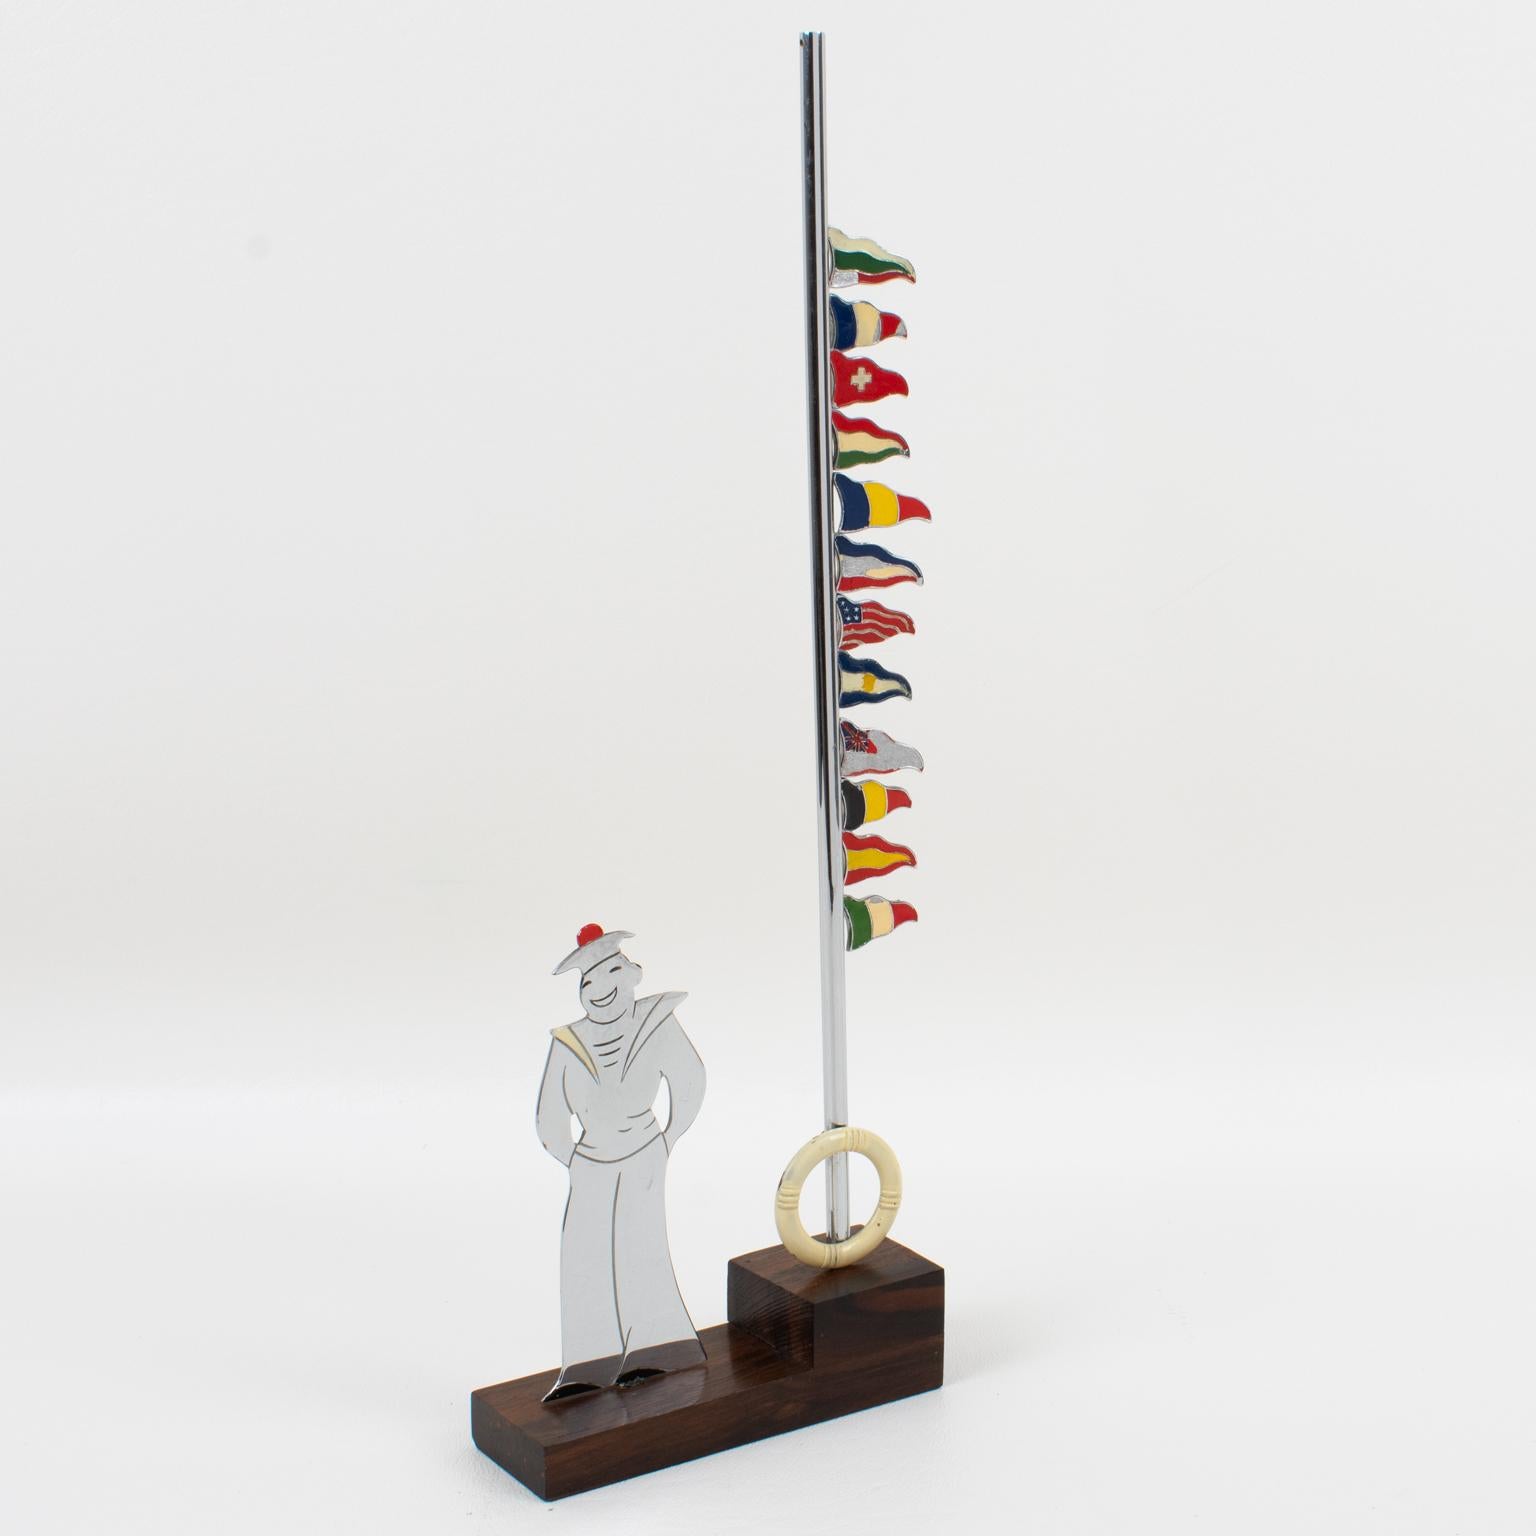 Sudre, Paris designs this stunning French Art Deco barware accessory glass-markers for cocktails and parties. The bar piece features a chromed metal silhouette of a French Navy sailor with enameling details and a tall pole holder. The Pole holder is